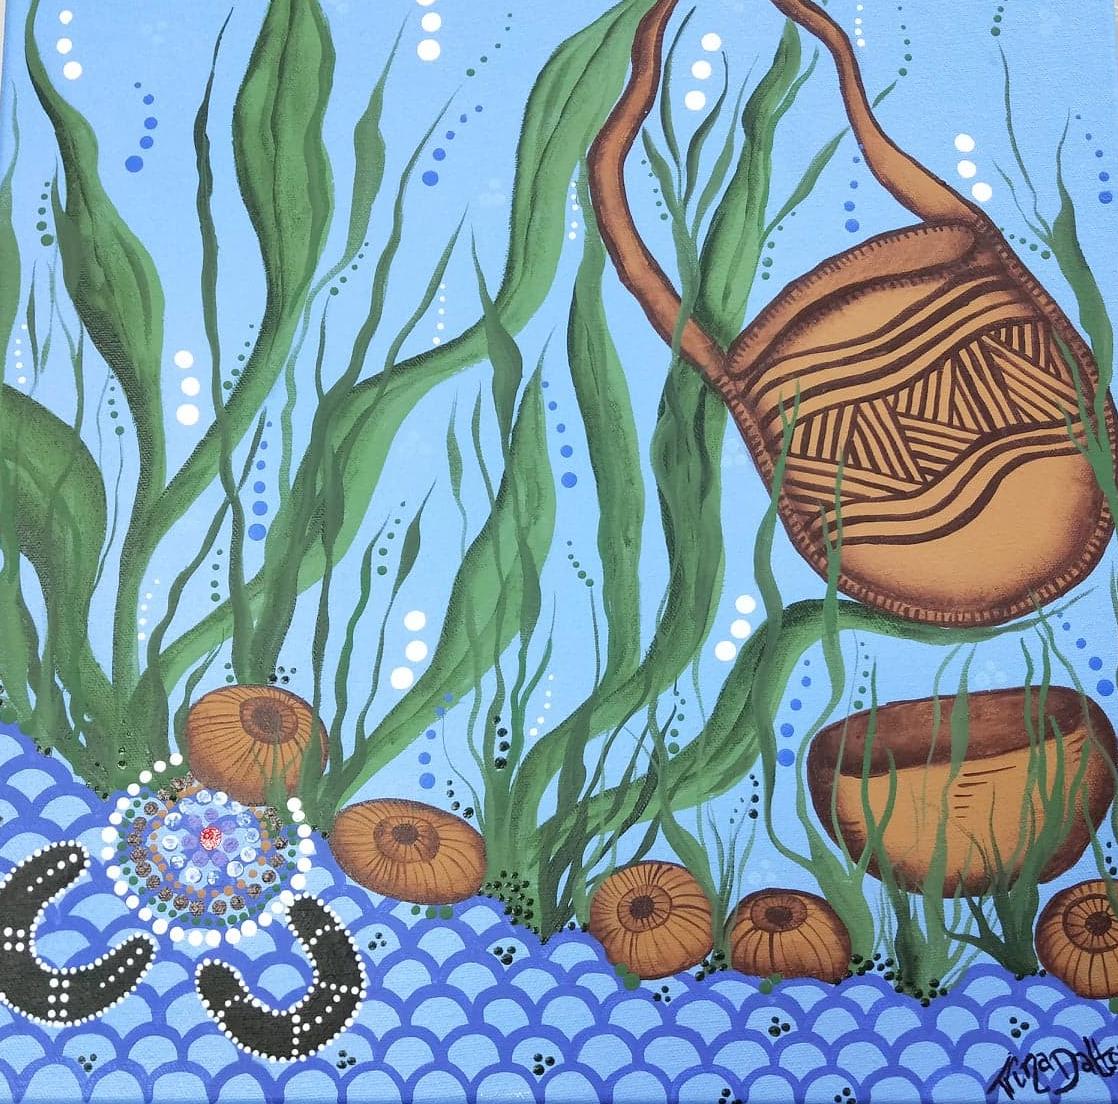 Illustration of seaweed and Traditional Owner seaweed products